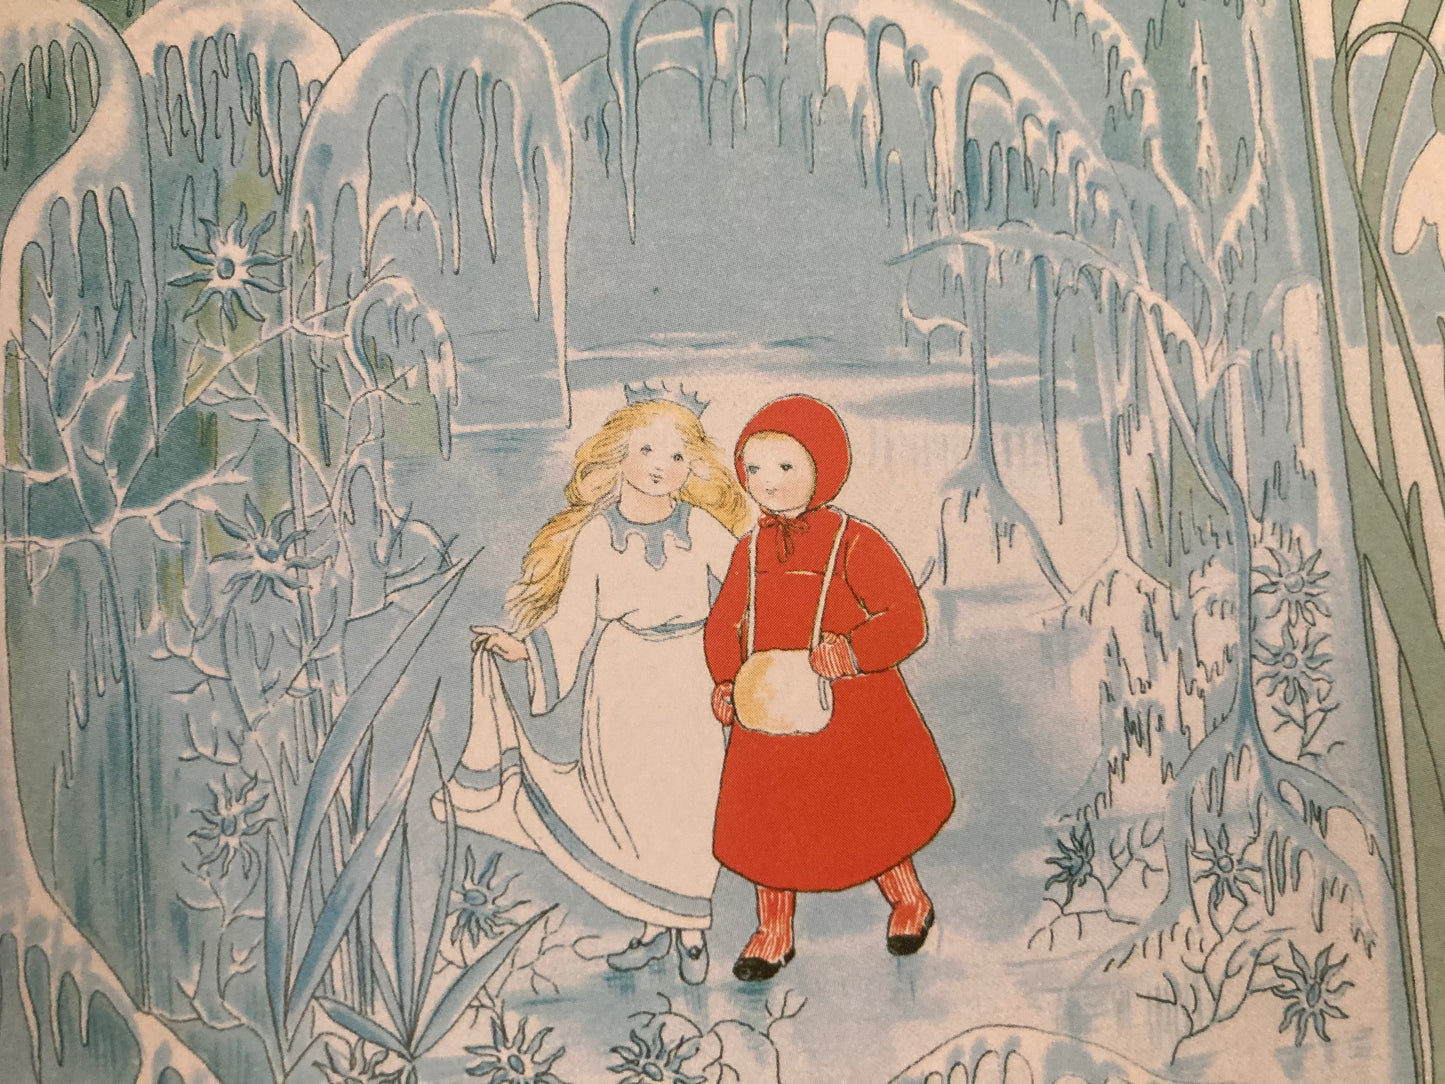 Children's Picture Book - THE STORY OF THE SNOW CHILDREN